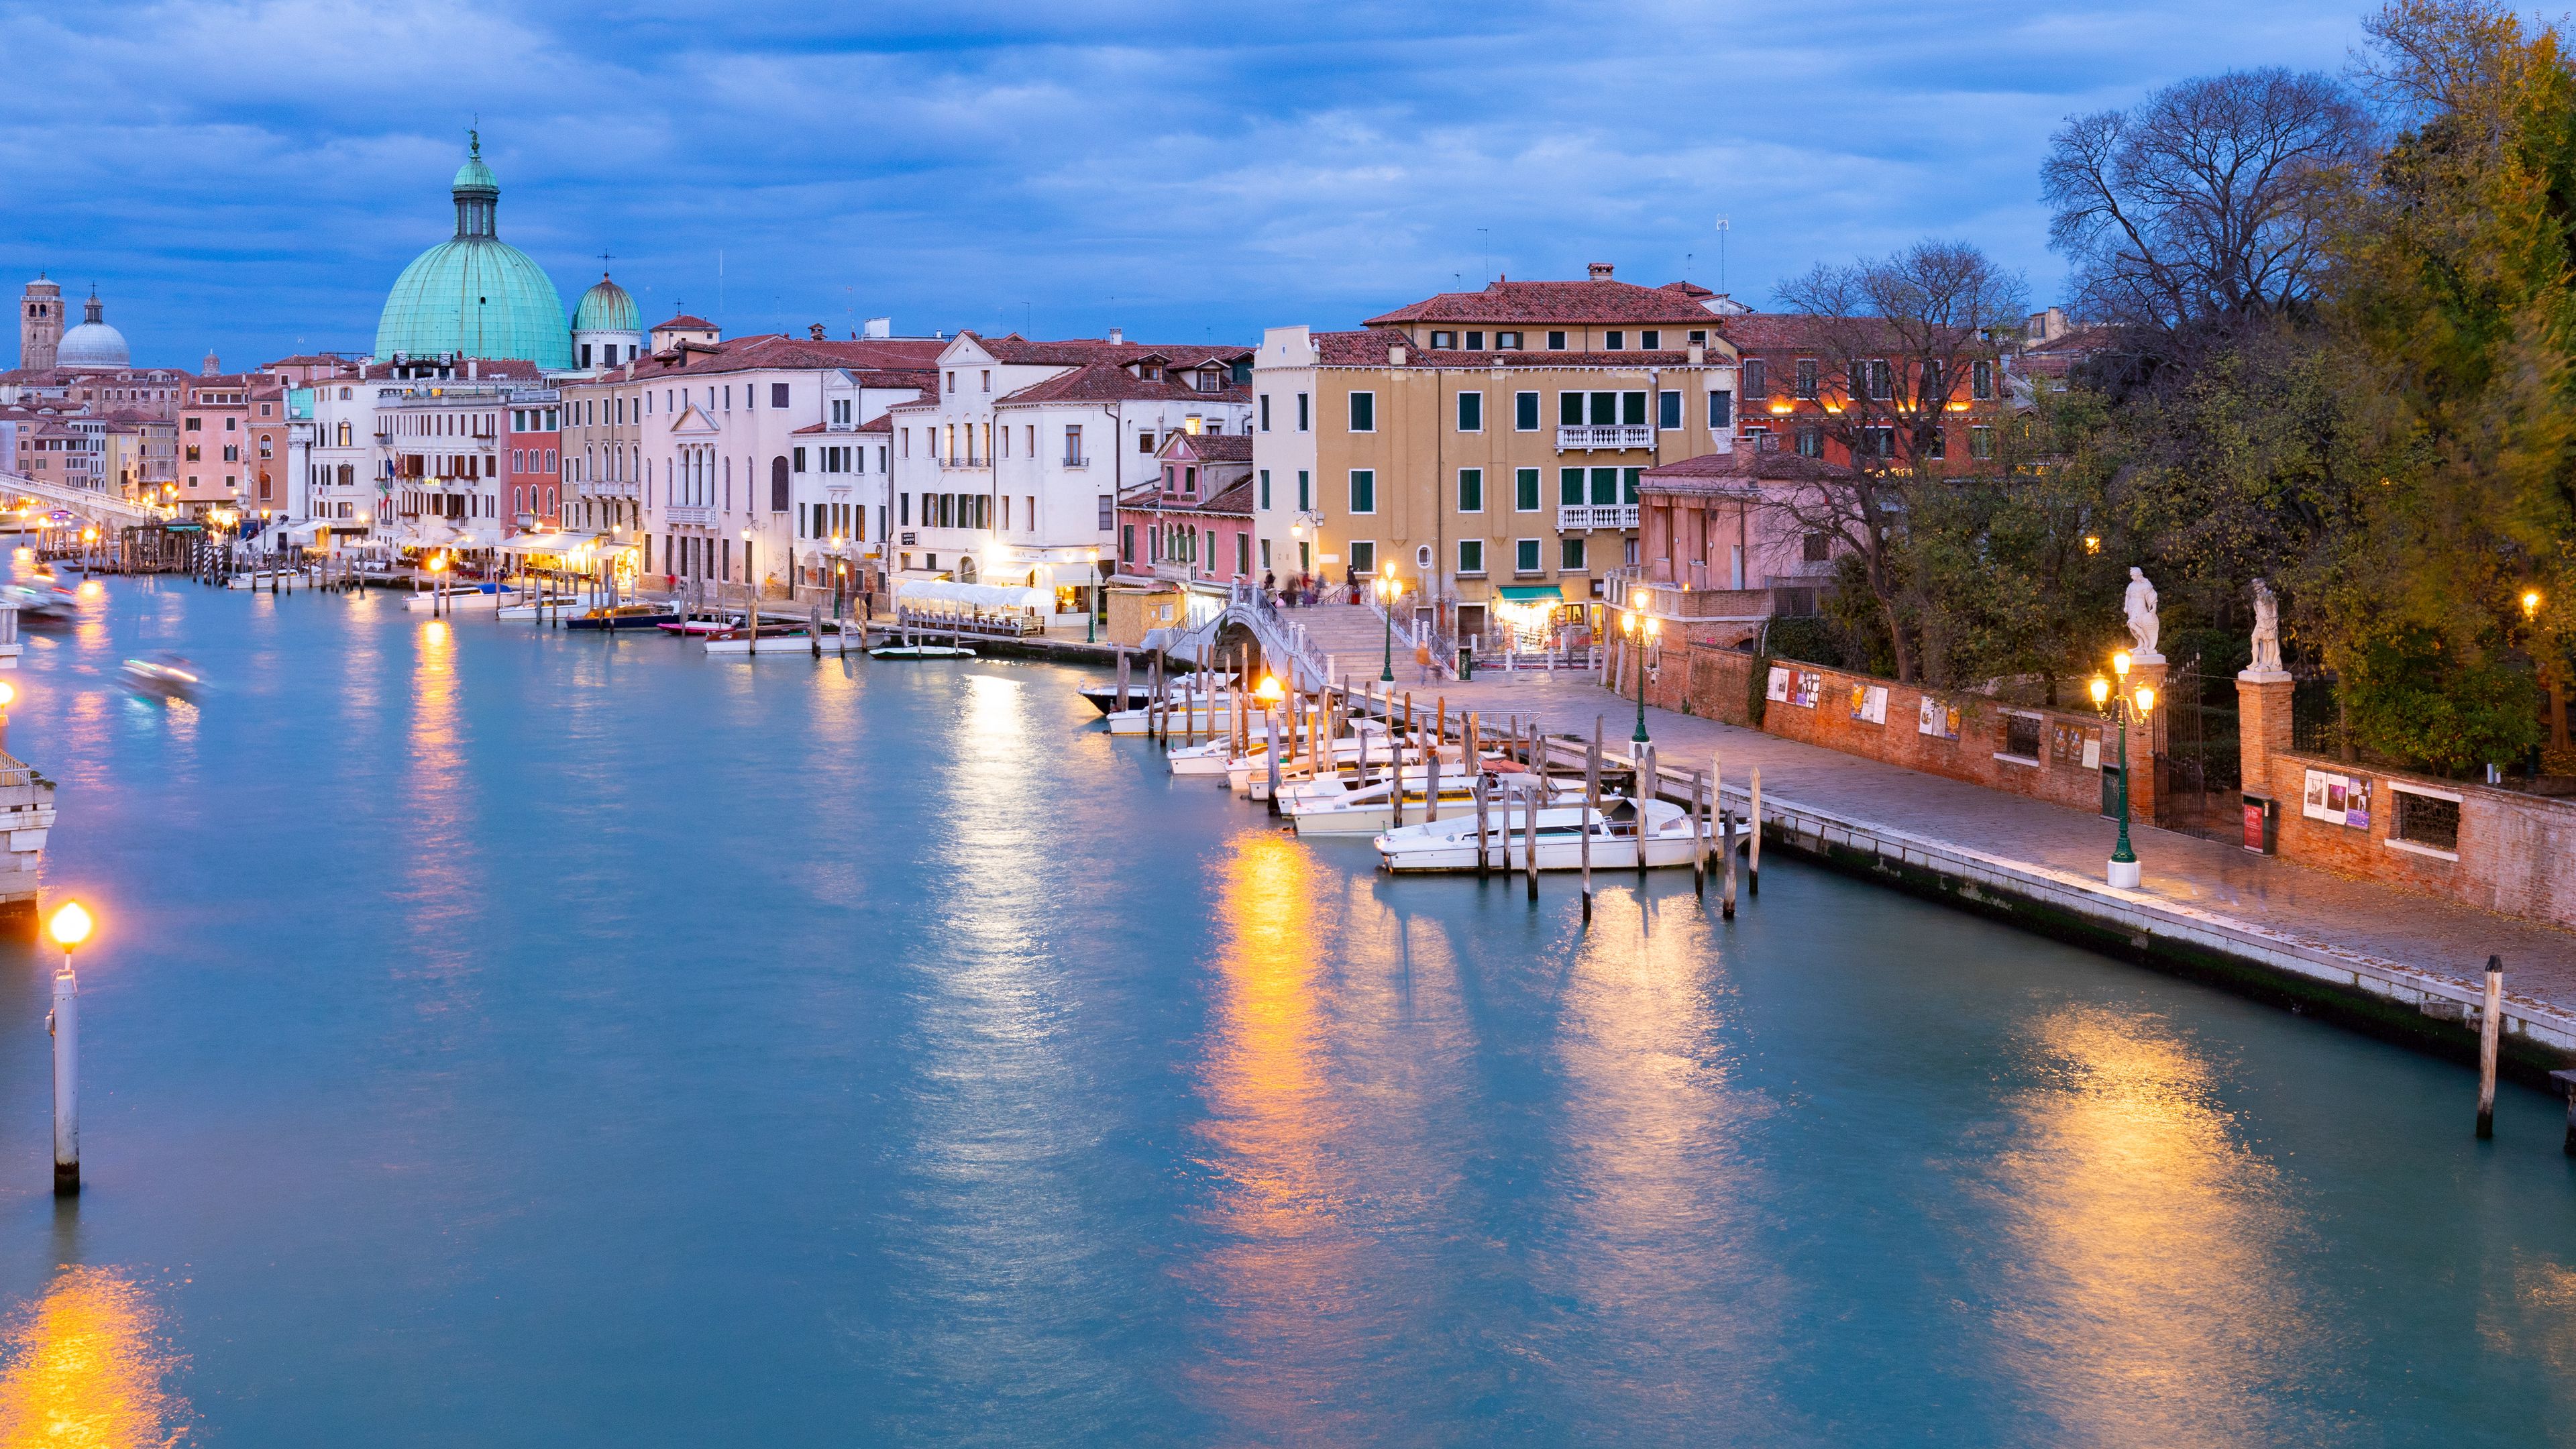 Download wallpaper 3840x2160 grand canal, venice, italy, canal, dome ...